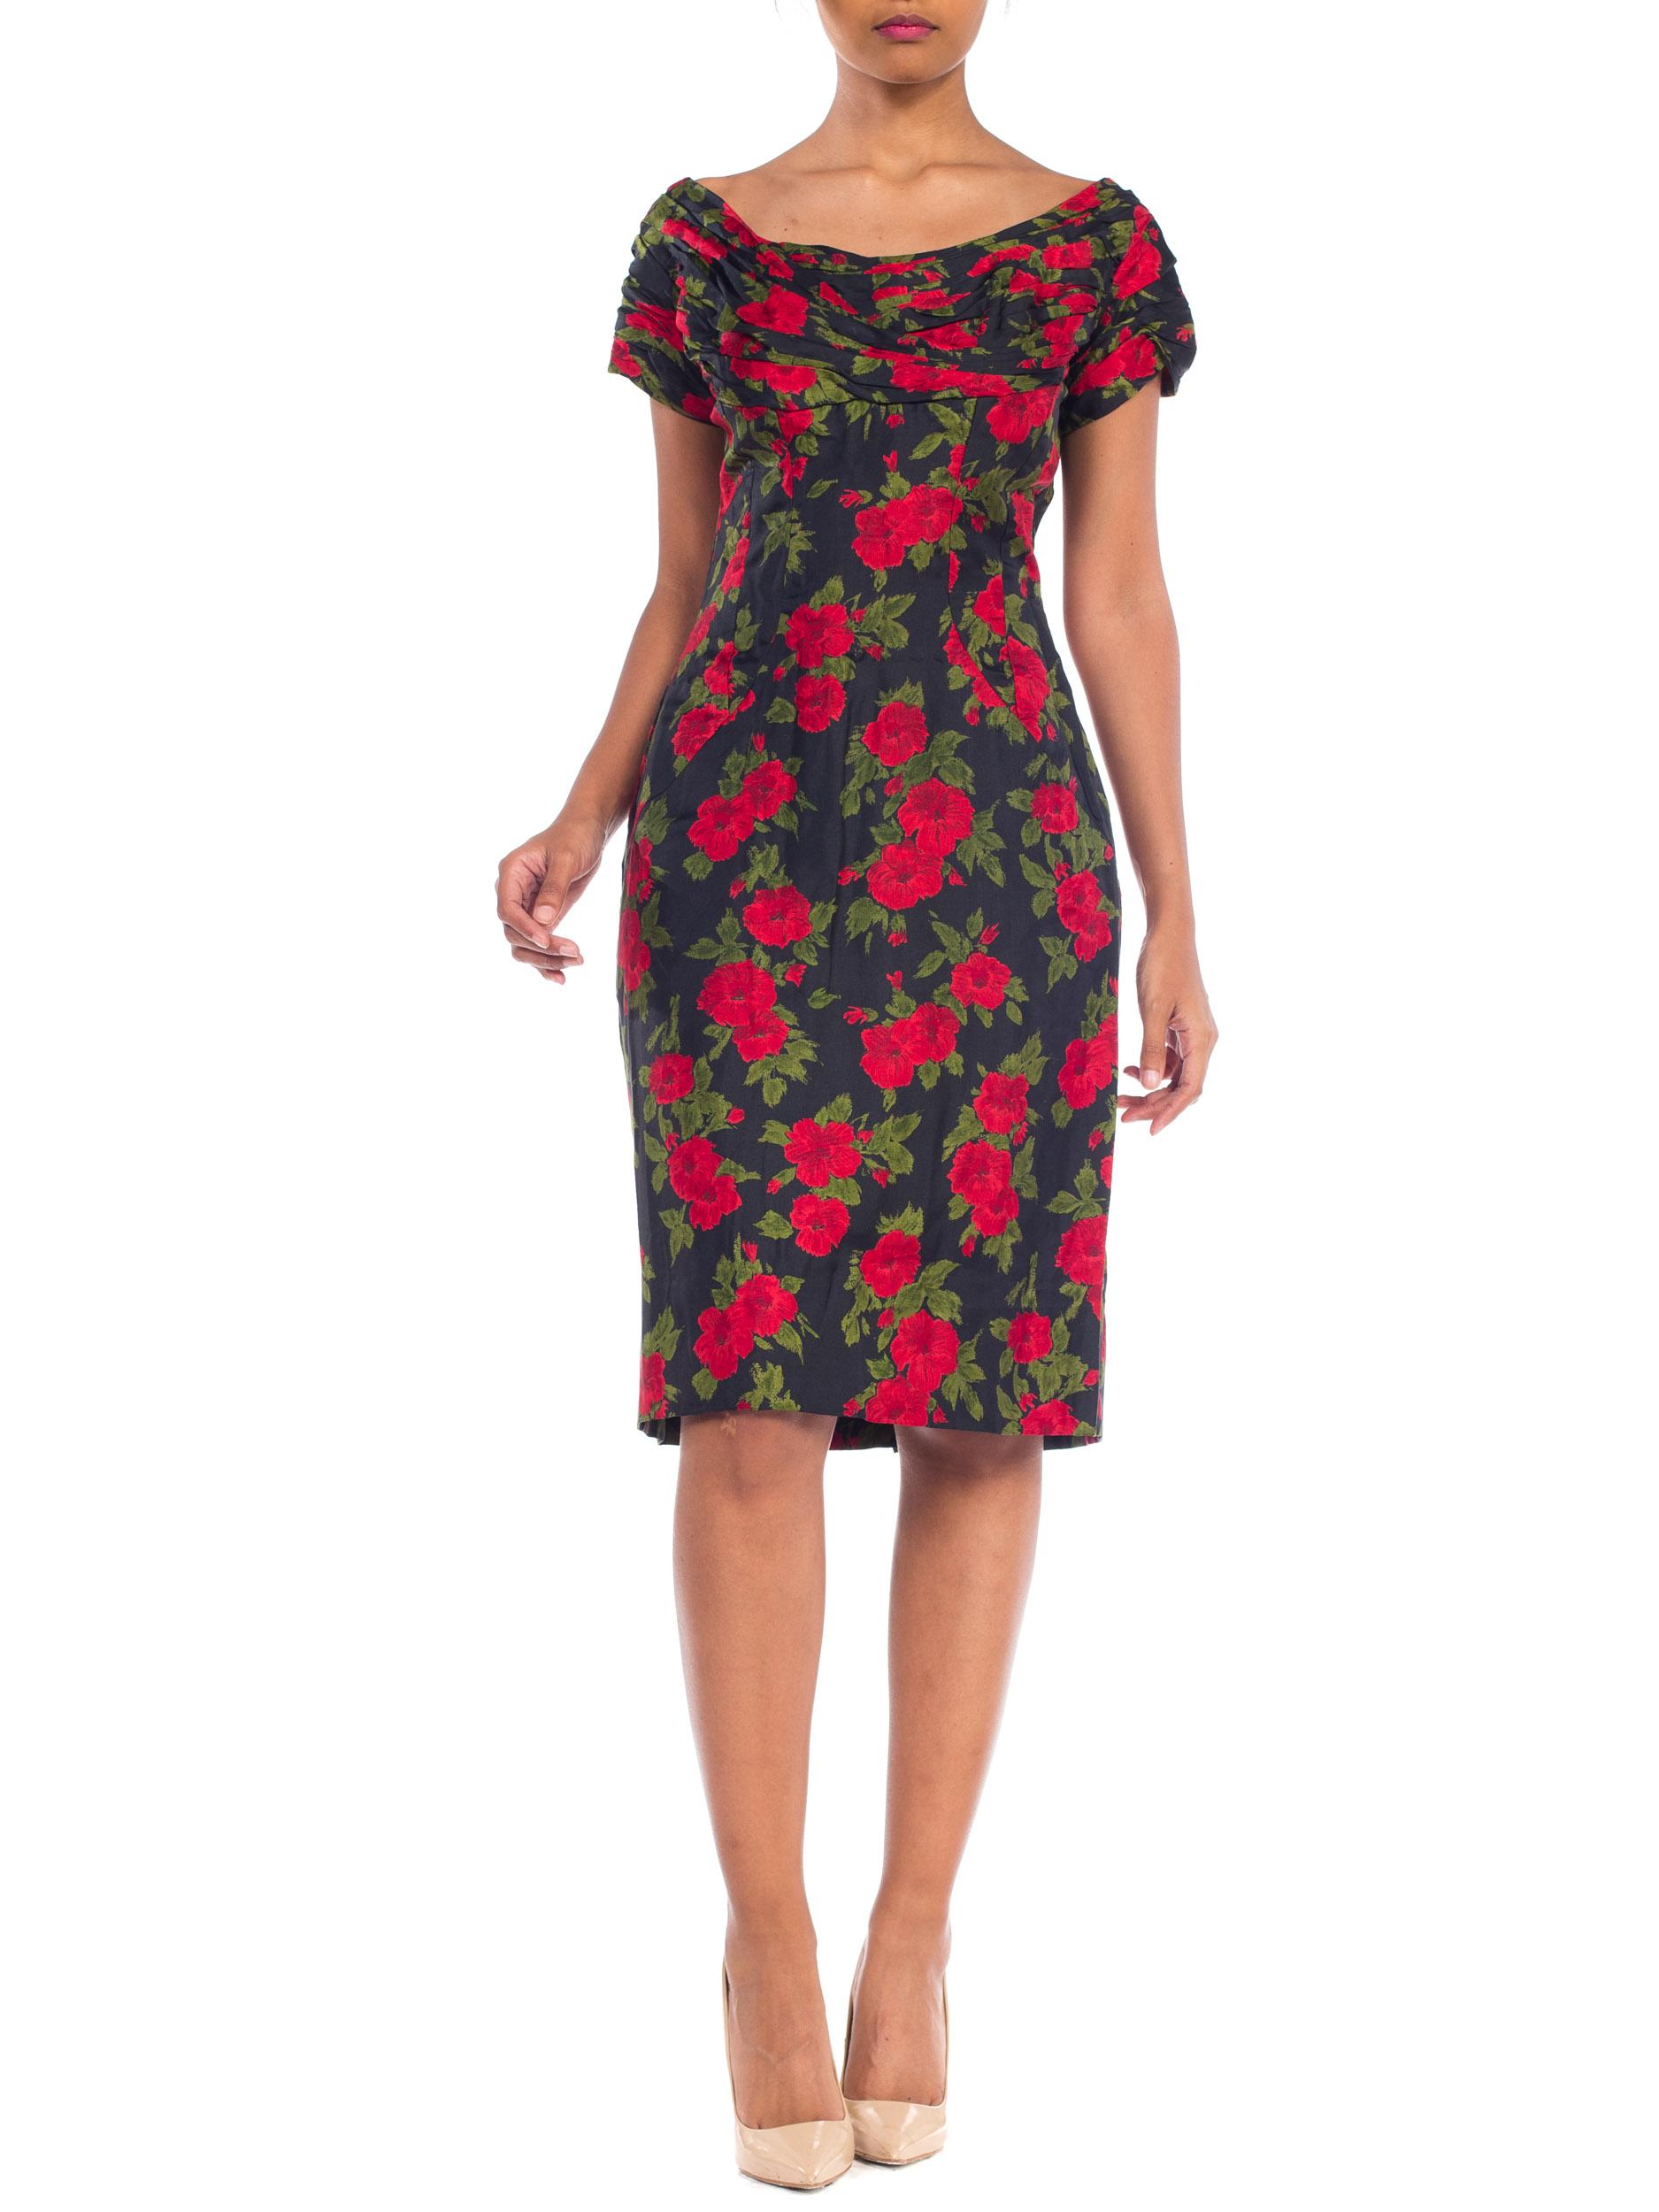 1950S DOLCE & GABBANA Style Silk Twill Red Black Classic Rose Floral Printed Dress With Hand Draped Neckline